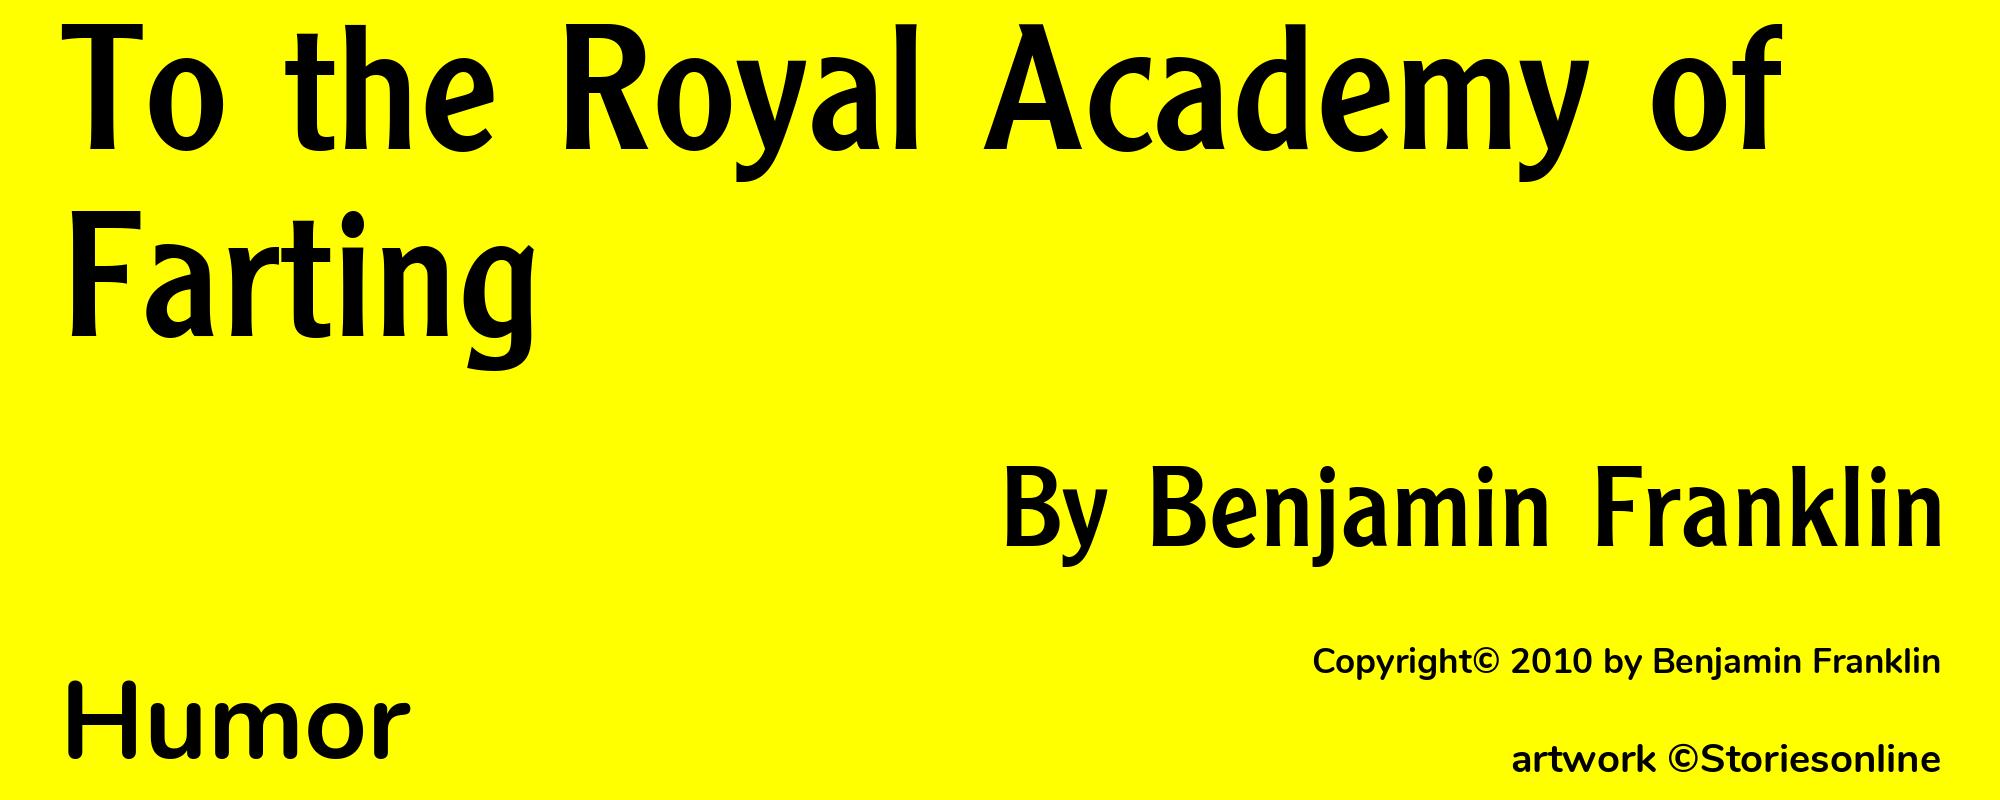 To the Royal Academy of Farting - Cover